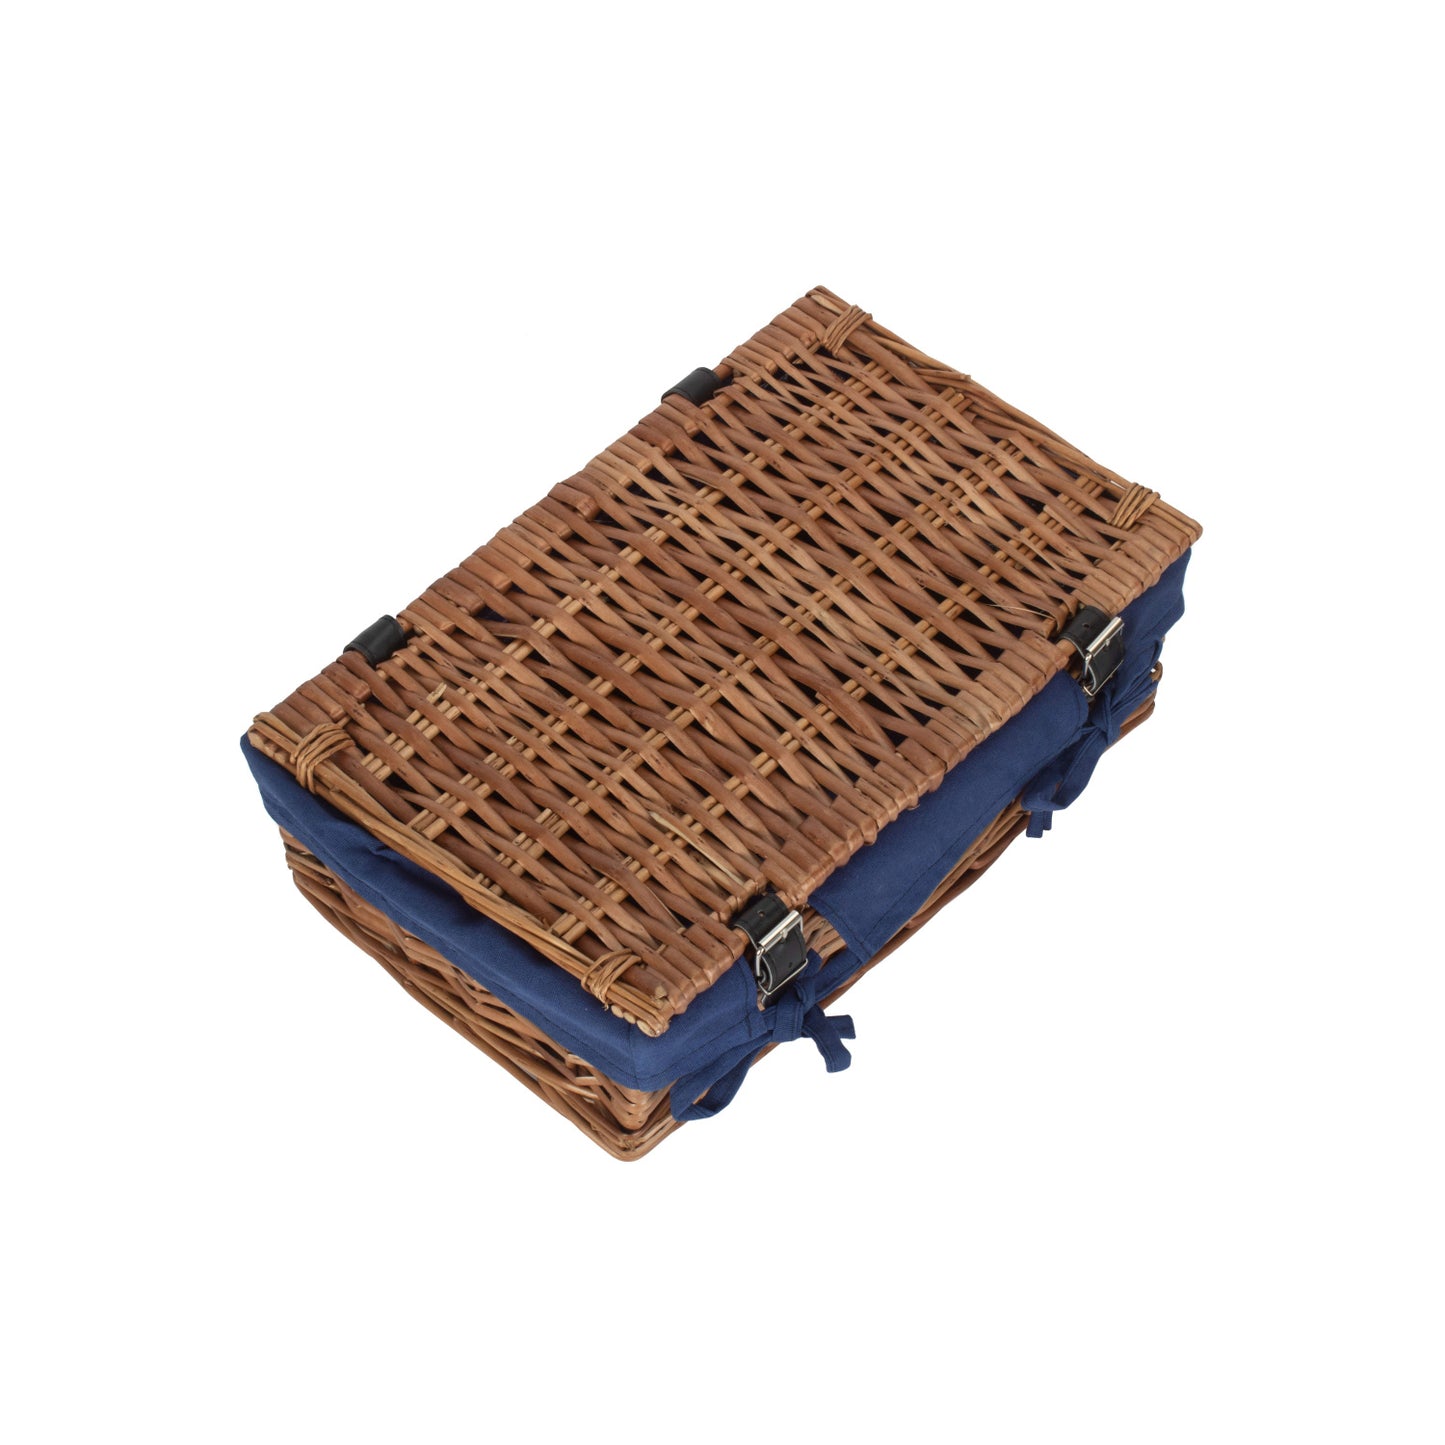 15 Inch Packaging Hamper With Navy Blue Lining